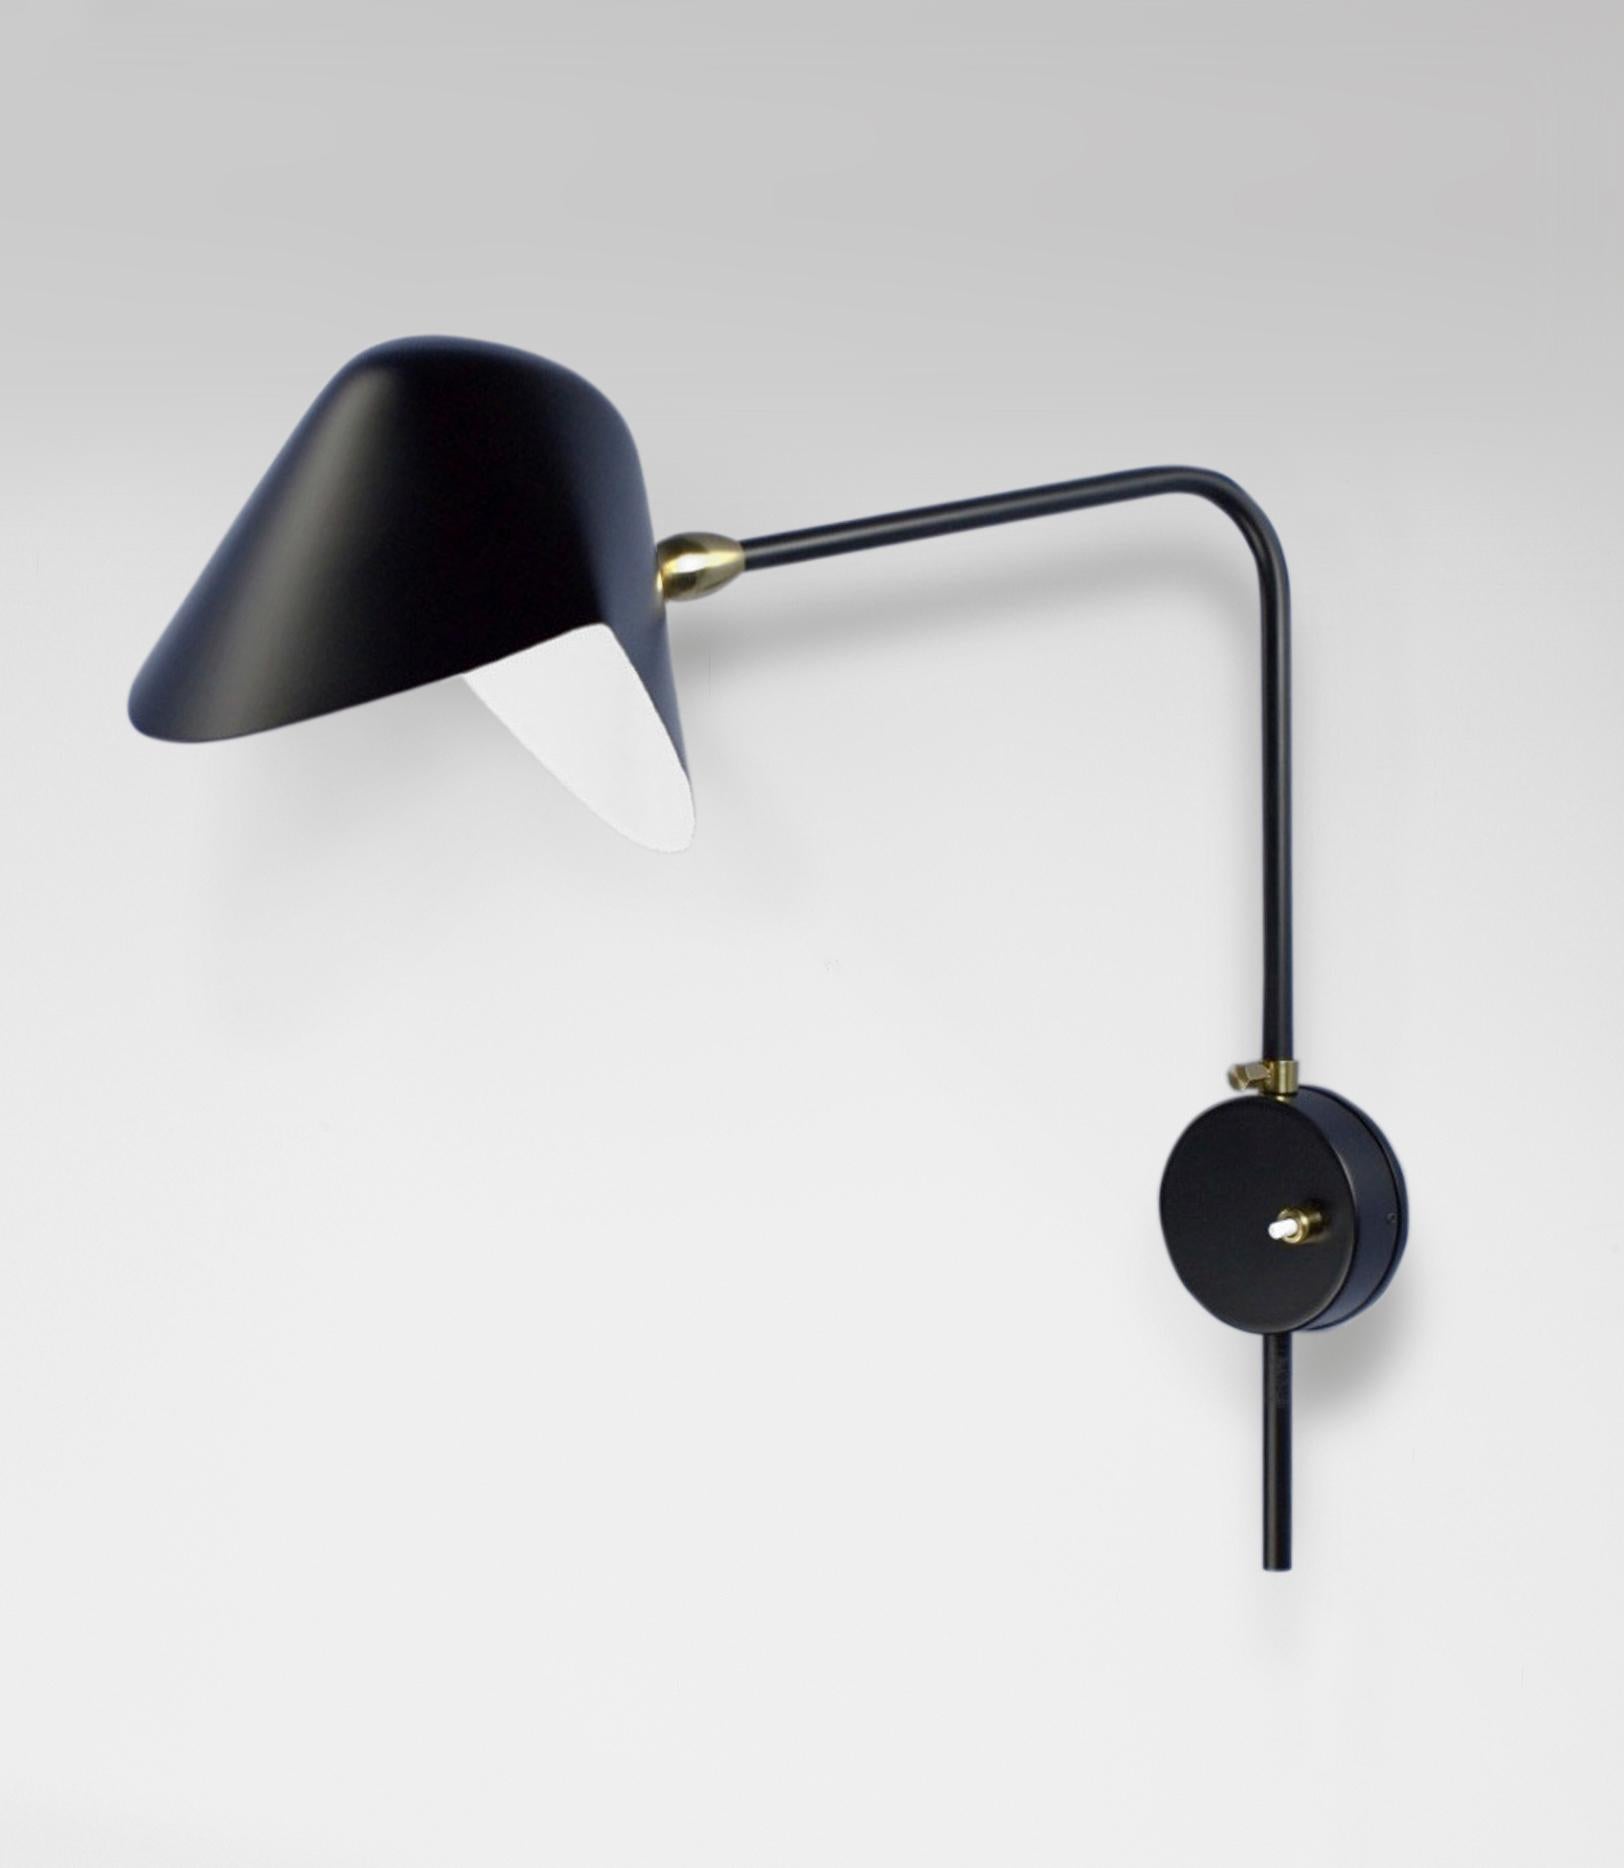 Wall Sconce lamp model 'Anthony Wall Lamp Whit Round Fixation Box' designed by Serge Mouille in 1953.

Manufactured by Editions Serge Mouille in France. The production of lamps, wall lights and floor lamps are manufactured using craftsman’s